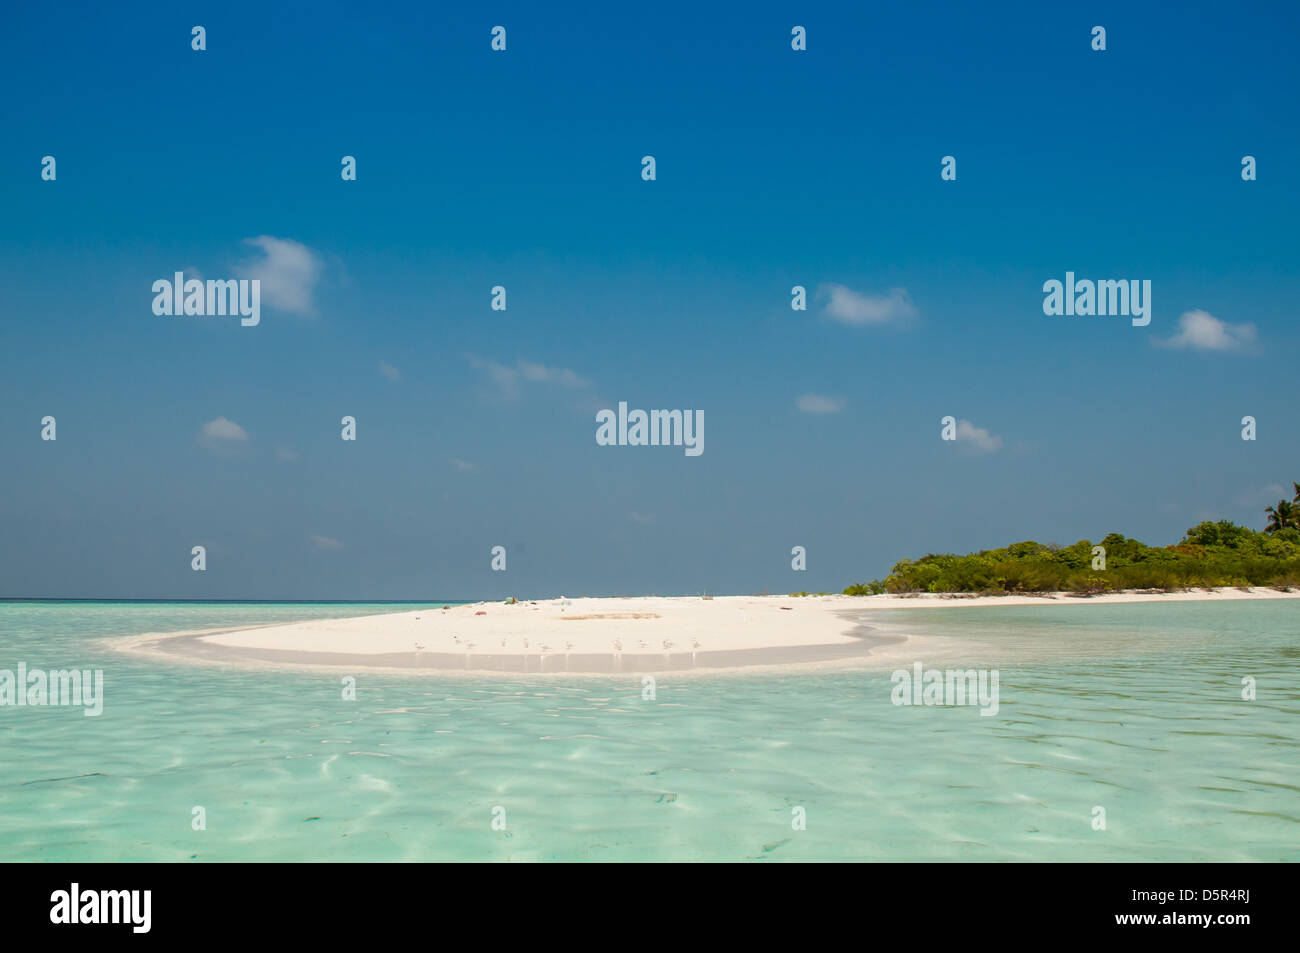 Beach tropical with white sand Stock Photo